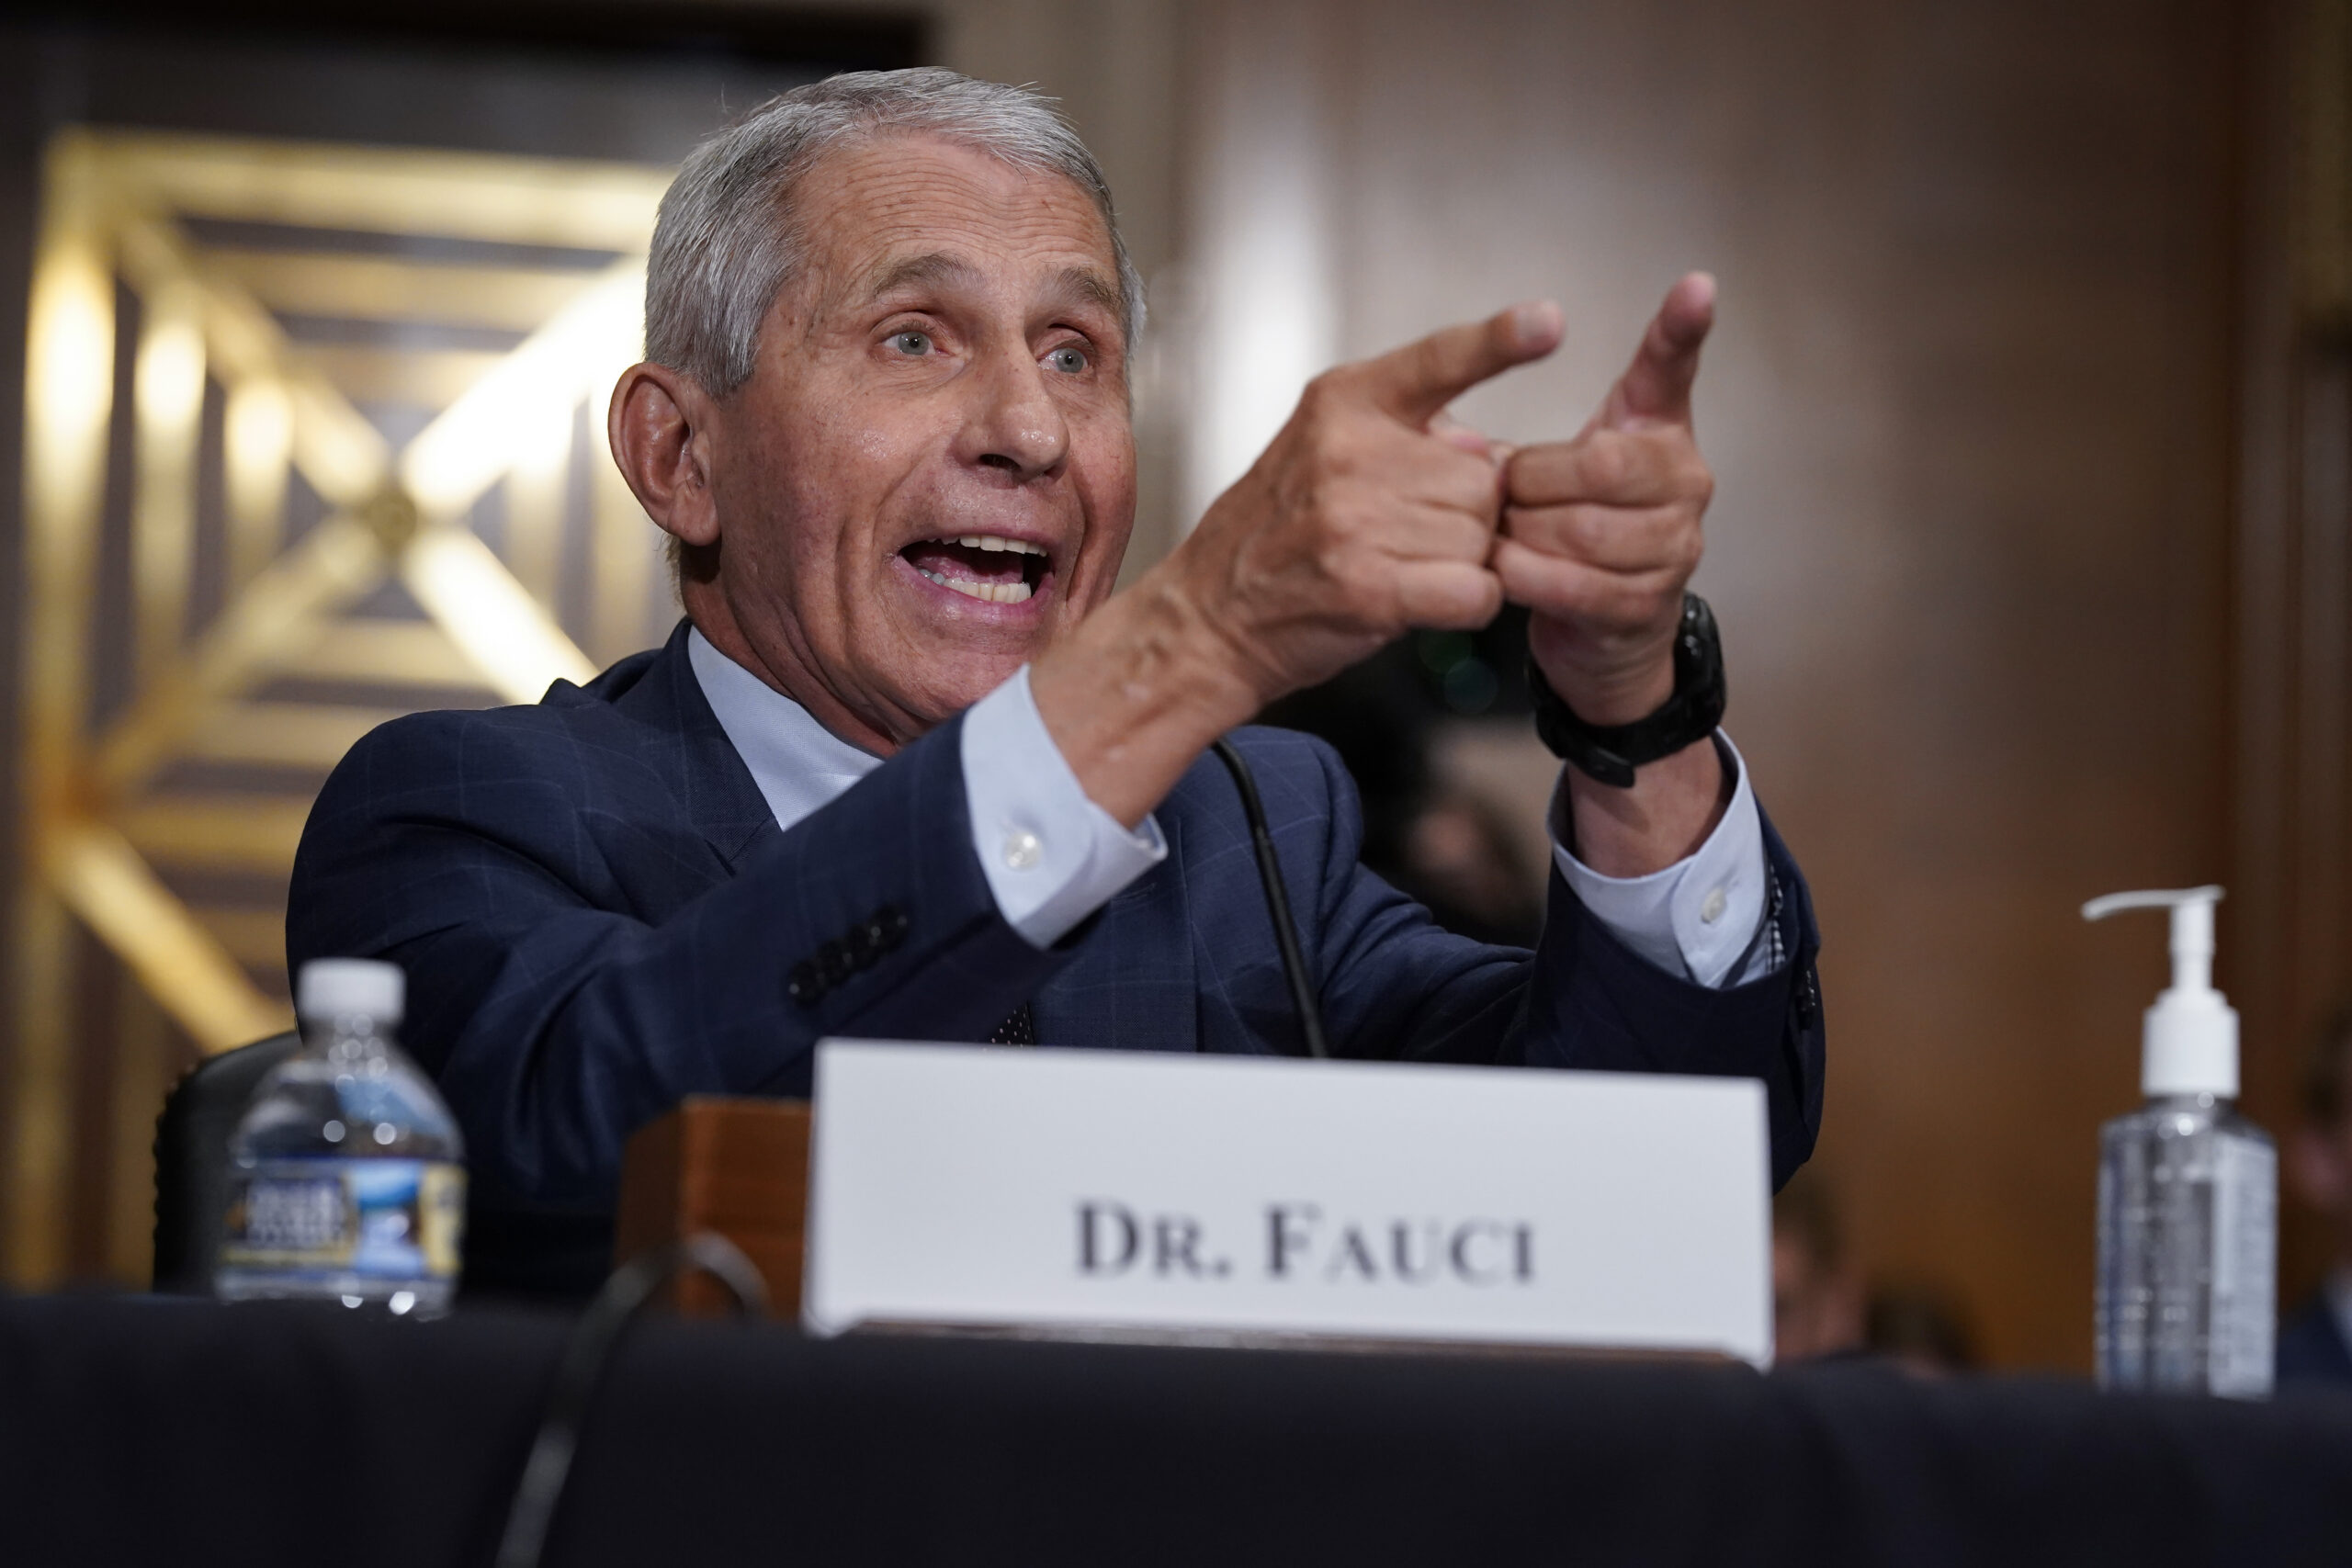 Top infectious disease expert Dr. Anthony Fauci responds to accusations by Sen. Rand Paul, R-Ky., as he testifies before the Senate Health, Education, Labor, and Pensions Committee about the origin of COVID-19, on Capitol Hill in Washington, Tuesday, July 20, 2021. Cases of COVID-19 have tripled over the past three weeks, and hospitalizations and deaths are rising among unvaccinated people. (AP Photo/J. Scott Applewhite, Pool)